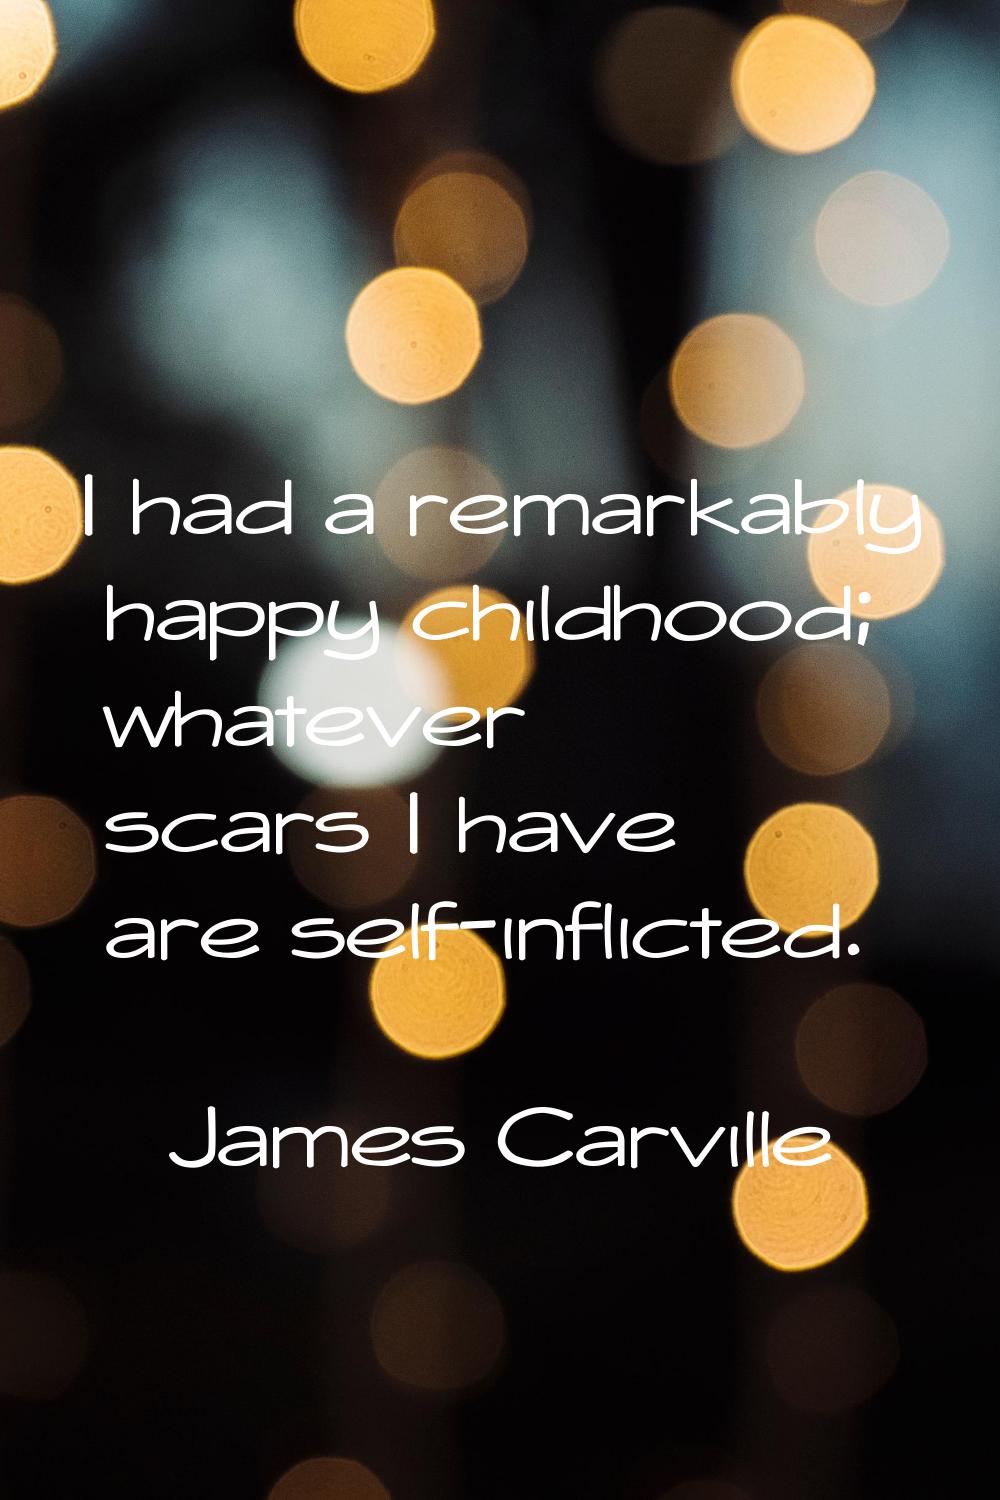 I had a remarkably happy childhood; whatever scars I have are self-inflicted.